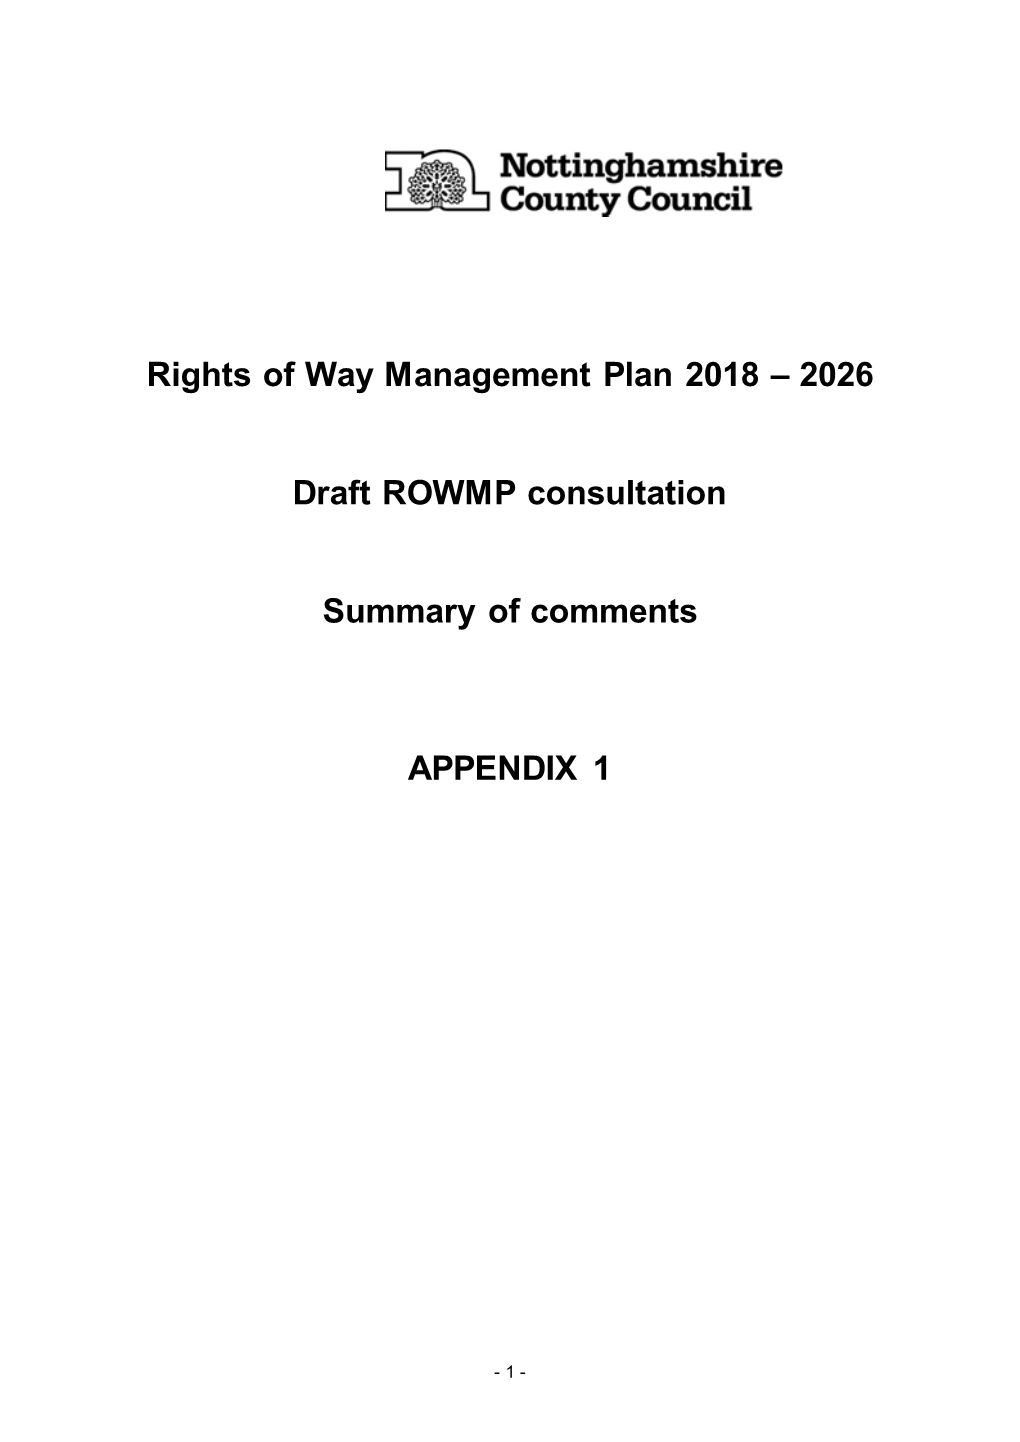 Rights of Way Improvement Plan 2007